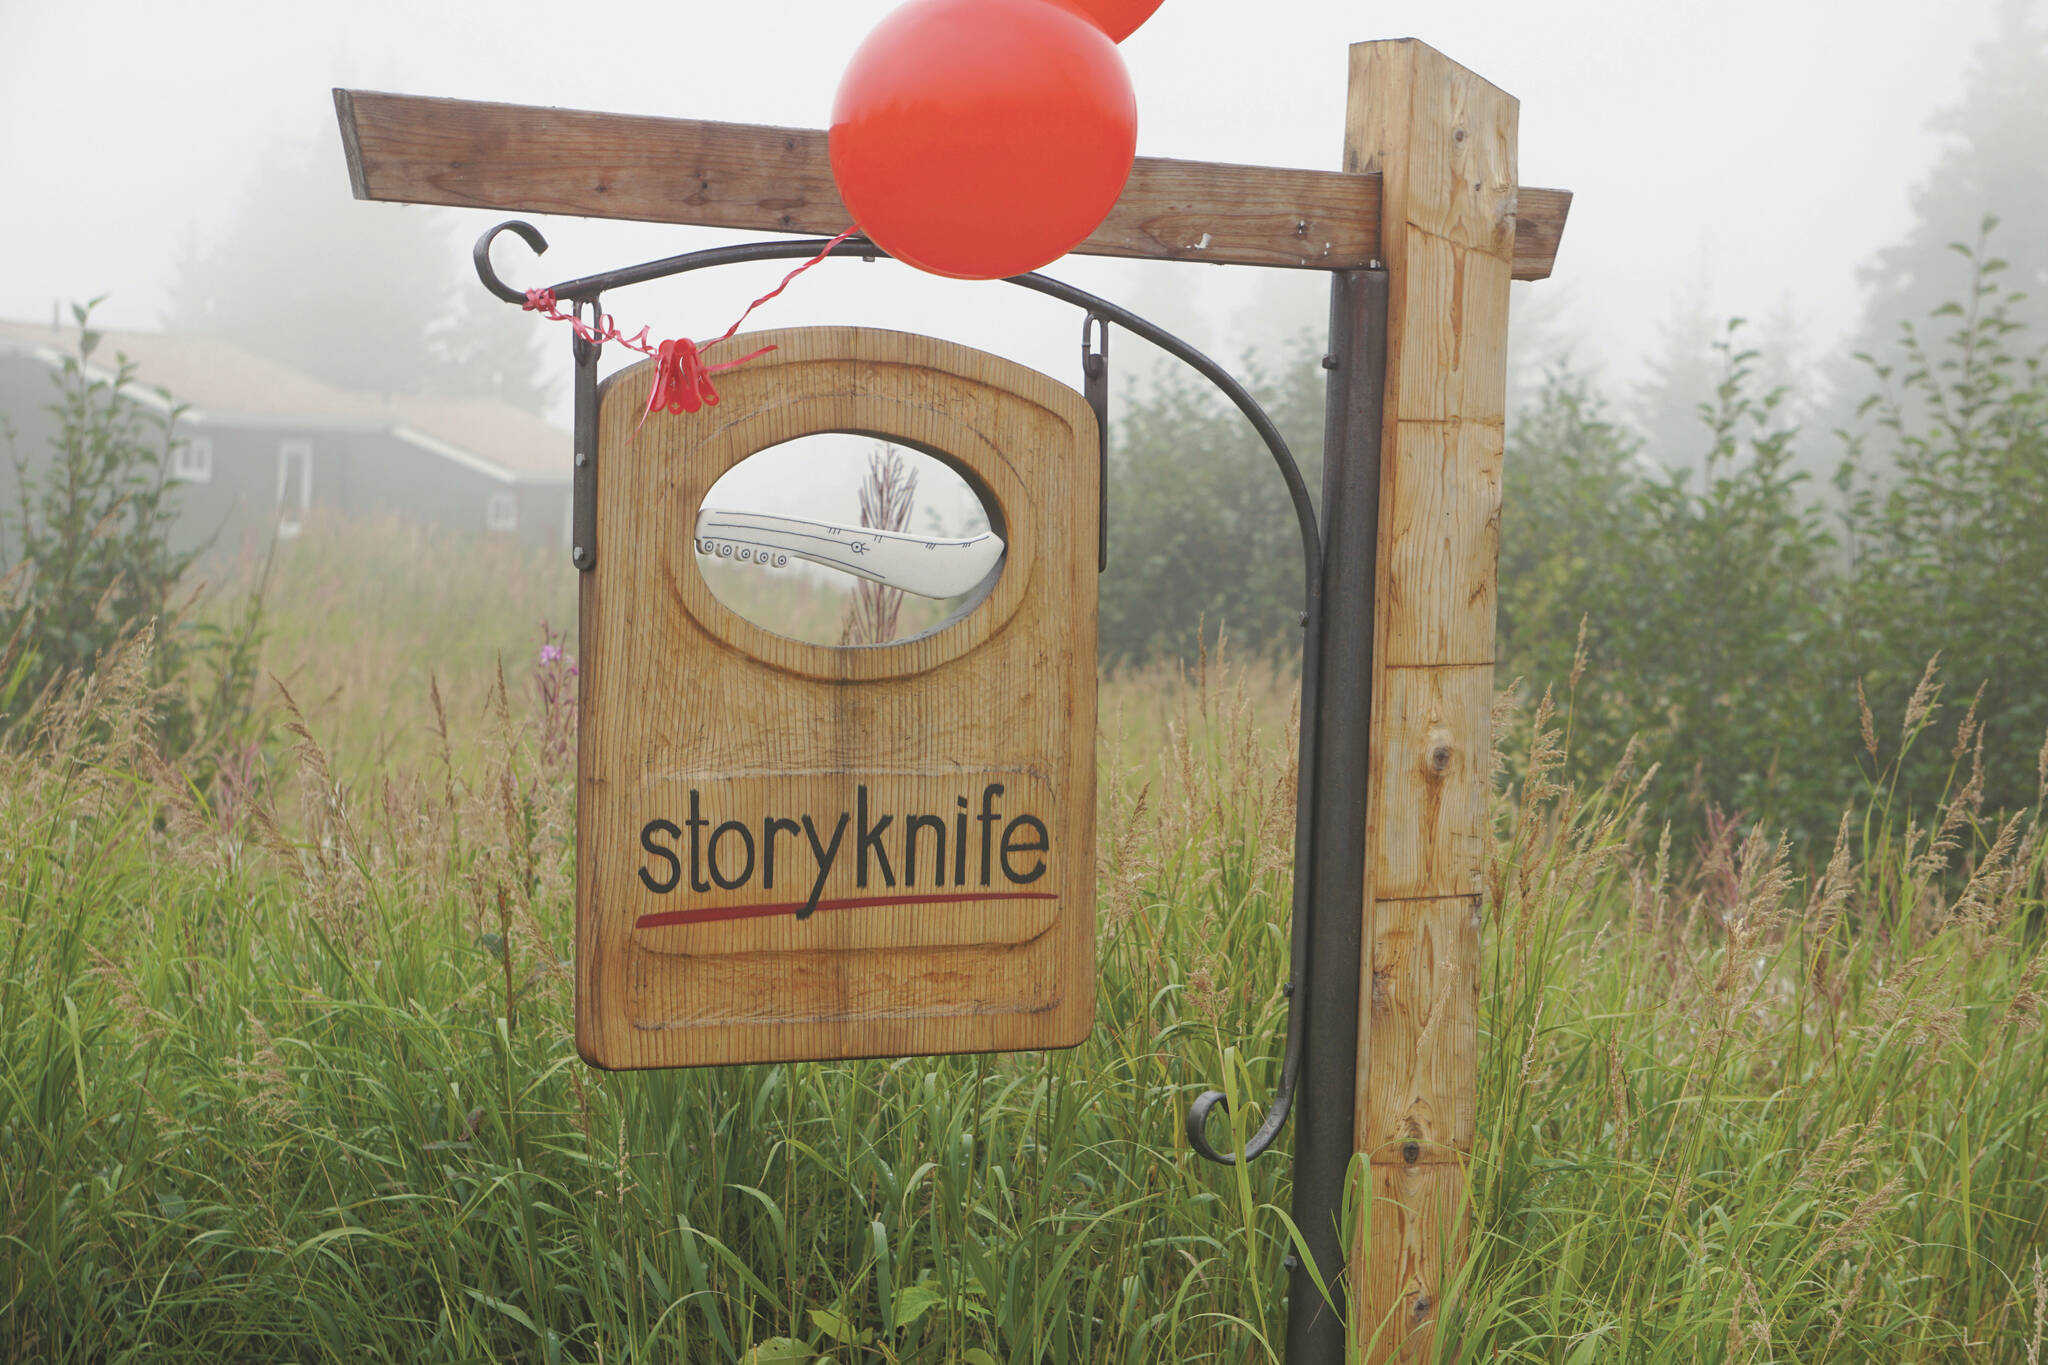 Fog rolls in over the sign for the Storyknife Writers Retreat at an open house on Monday, Aug. 29, near Homer.